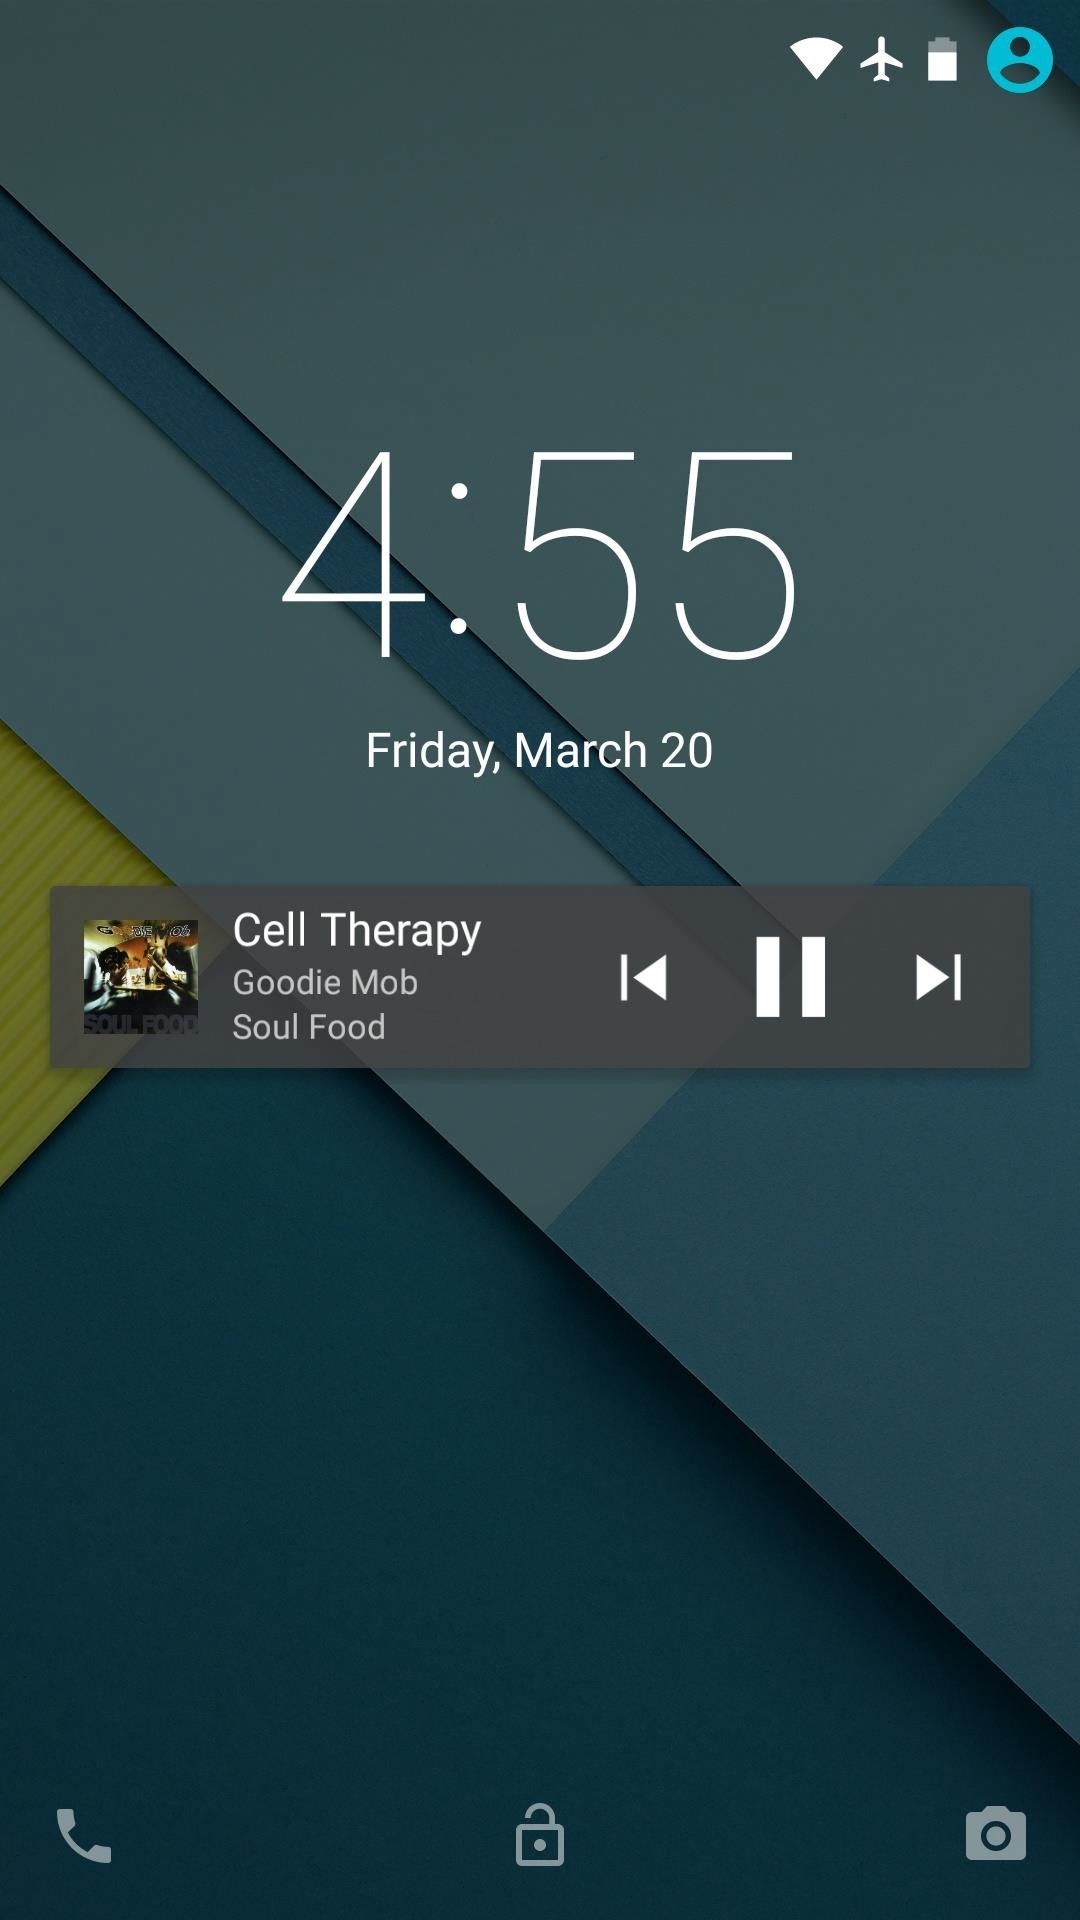 How to Disable Lock Screen Album Art in Android Lollipop